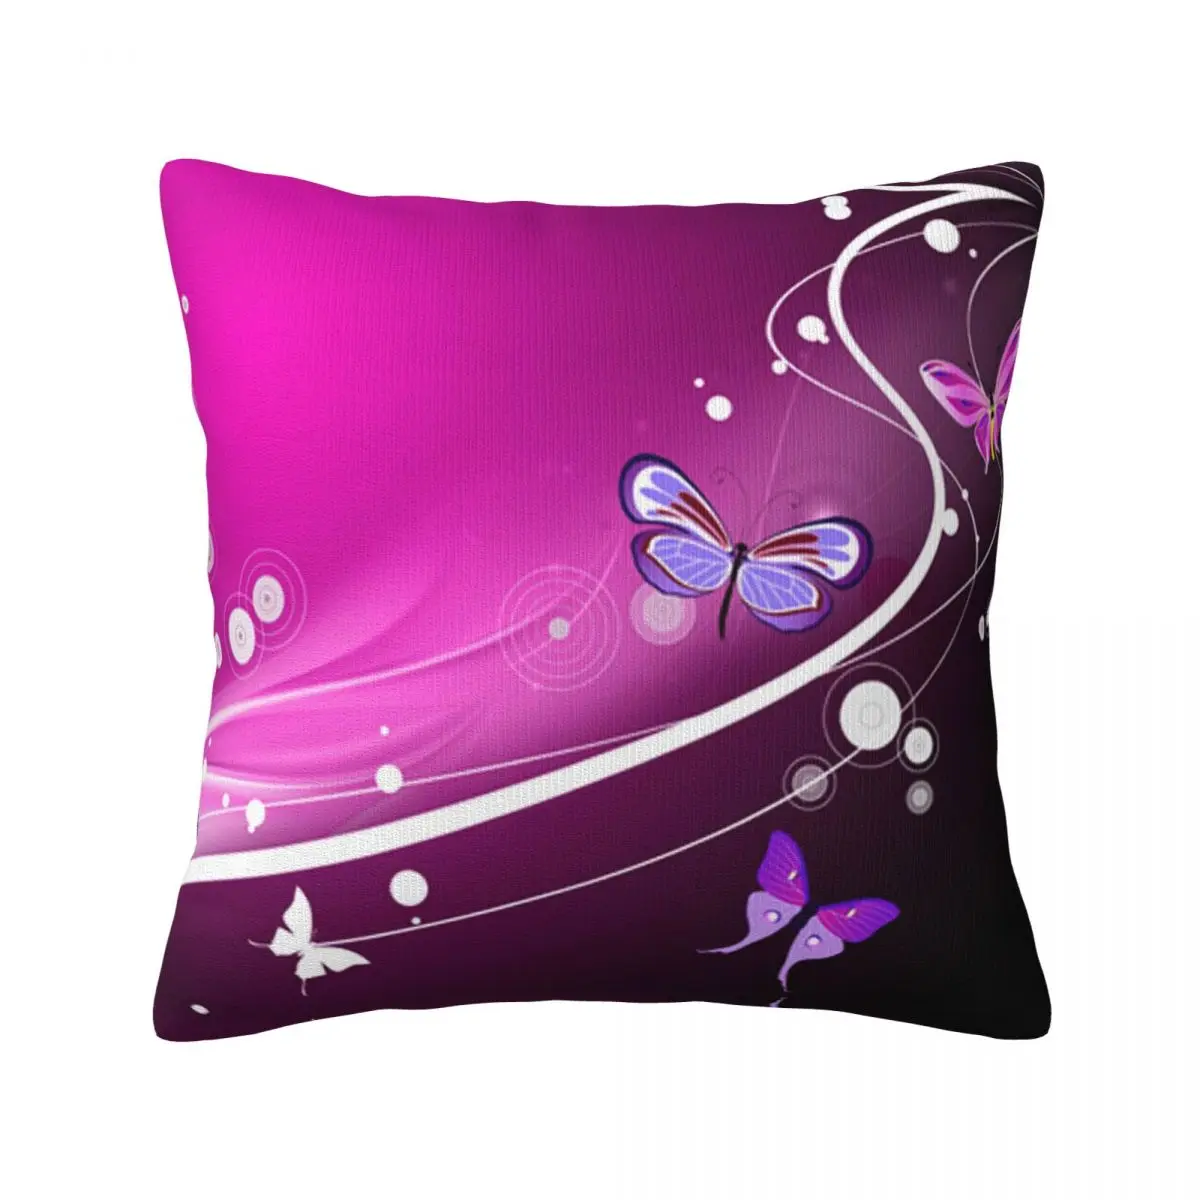 

Pink Butter-fly Design Throw Pillow Cover Decorative Pillow Covers Home Pillows Shells Cushion Cover Zippered Pillowcase